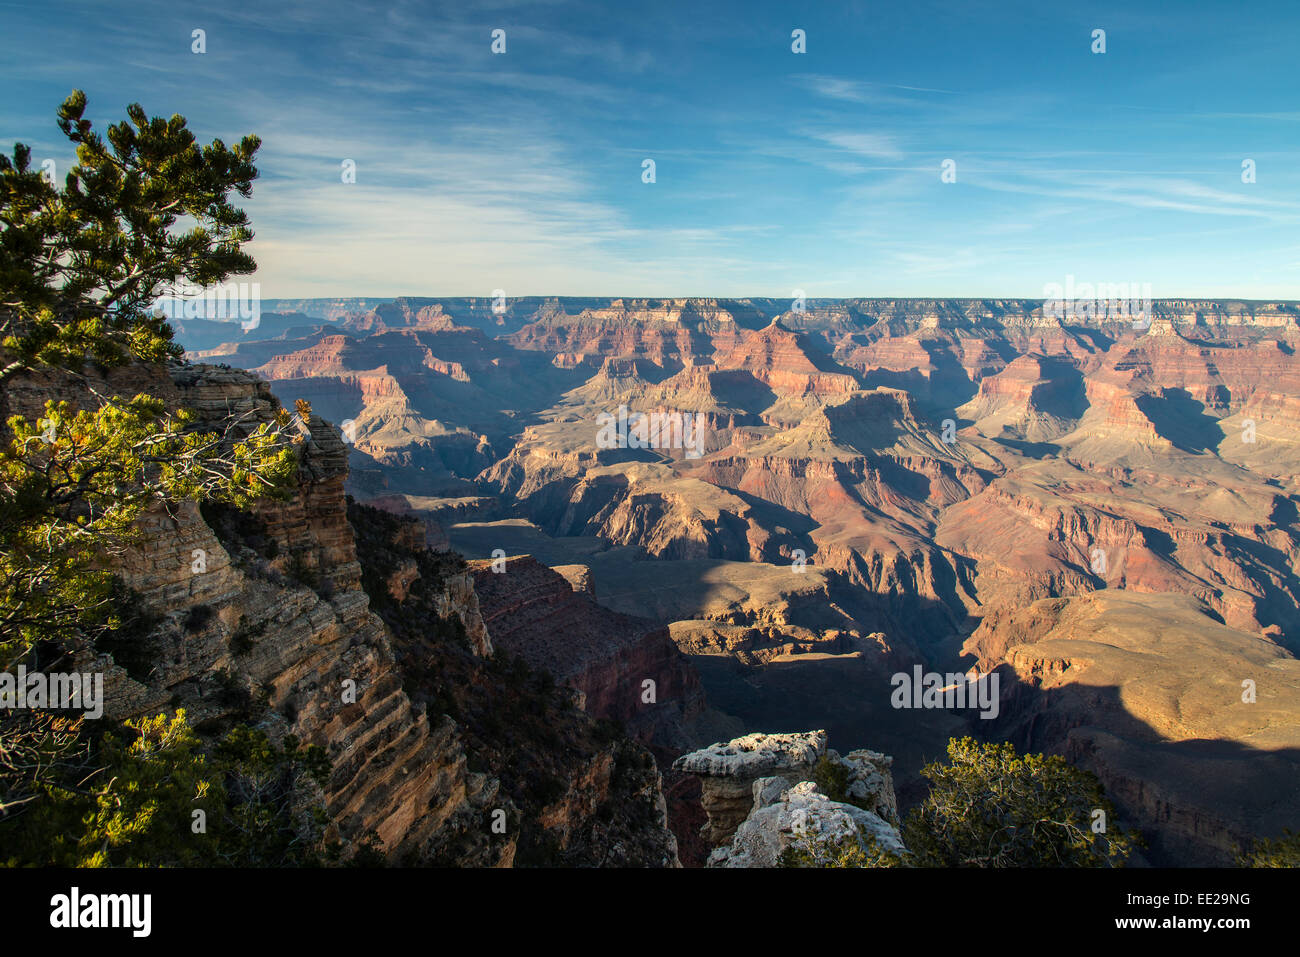 Top view of south rim from Hopi Point, Grand Canyon National Park, Arizona, USA Stock Photo